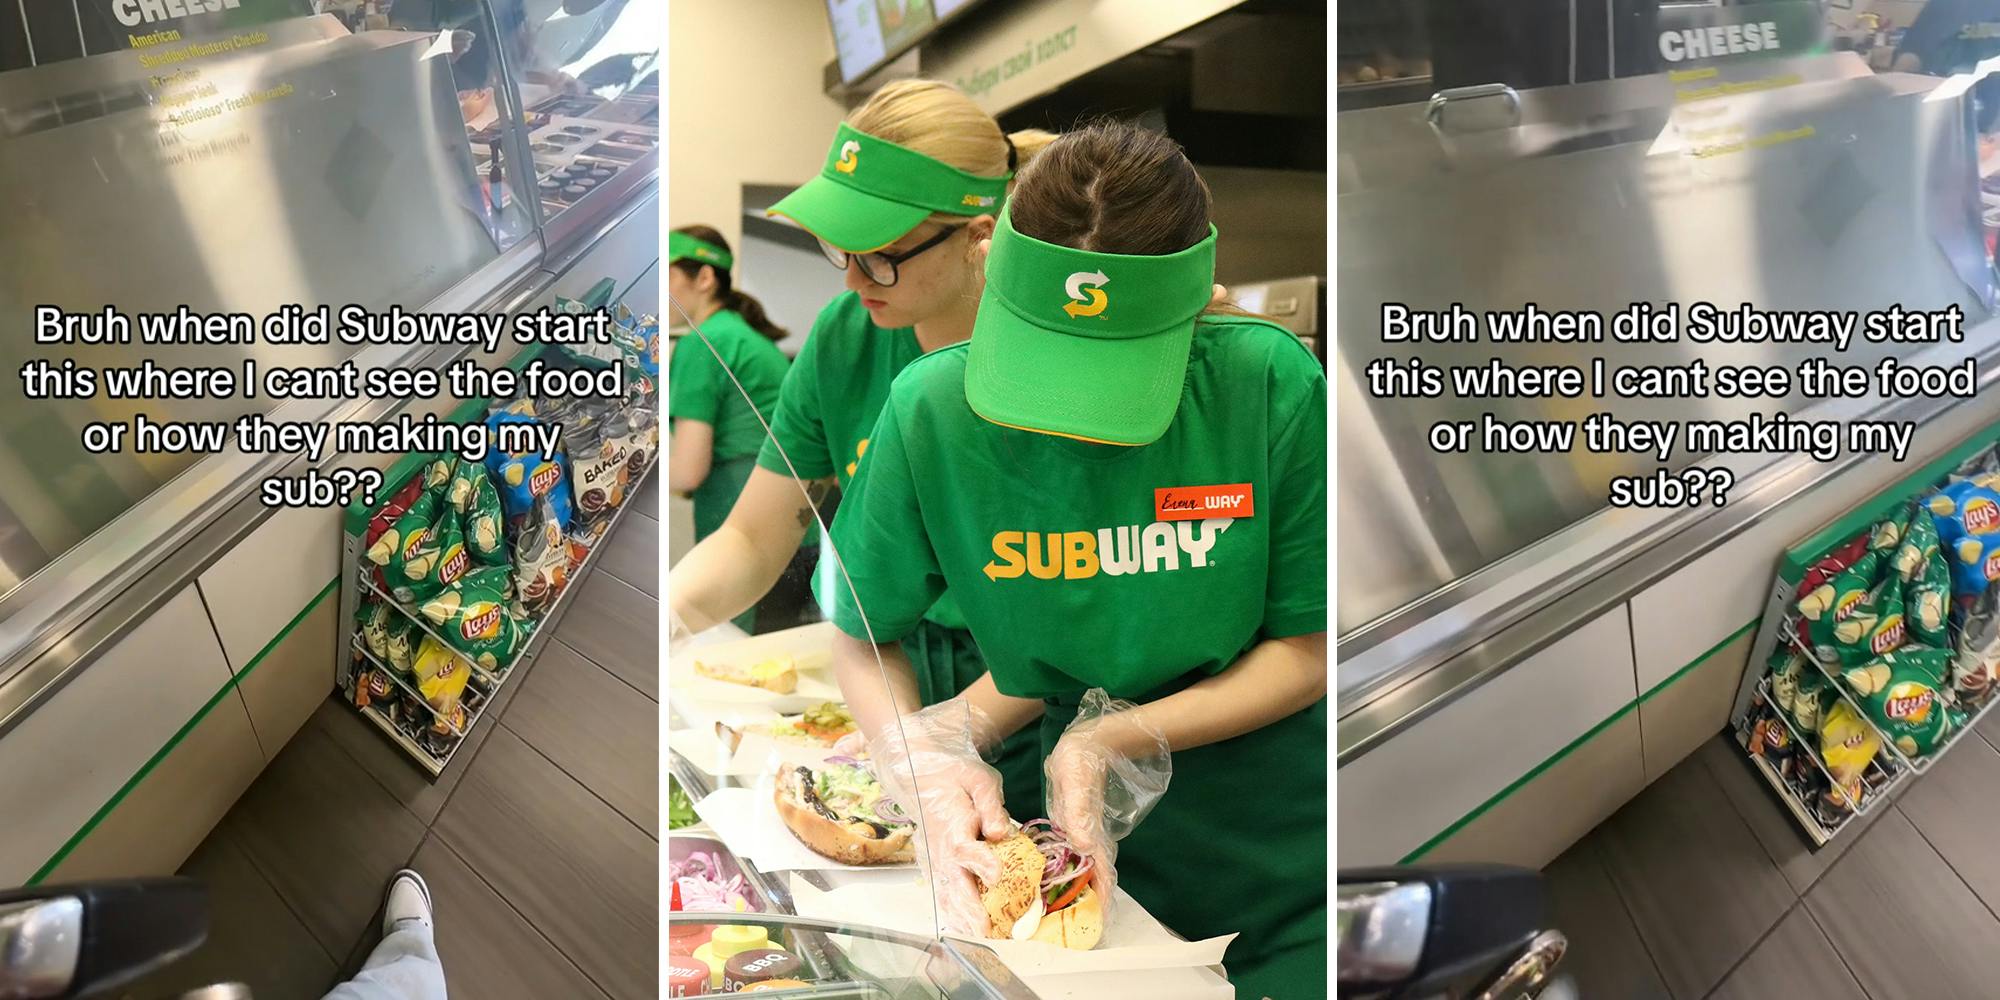 ‘We’re supposed to tell customers it’s to keep it cold but…’: Subway customer questions new cover hiding meats, says it makes it impossible to see sandwich being prepared